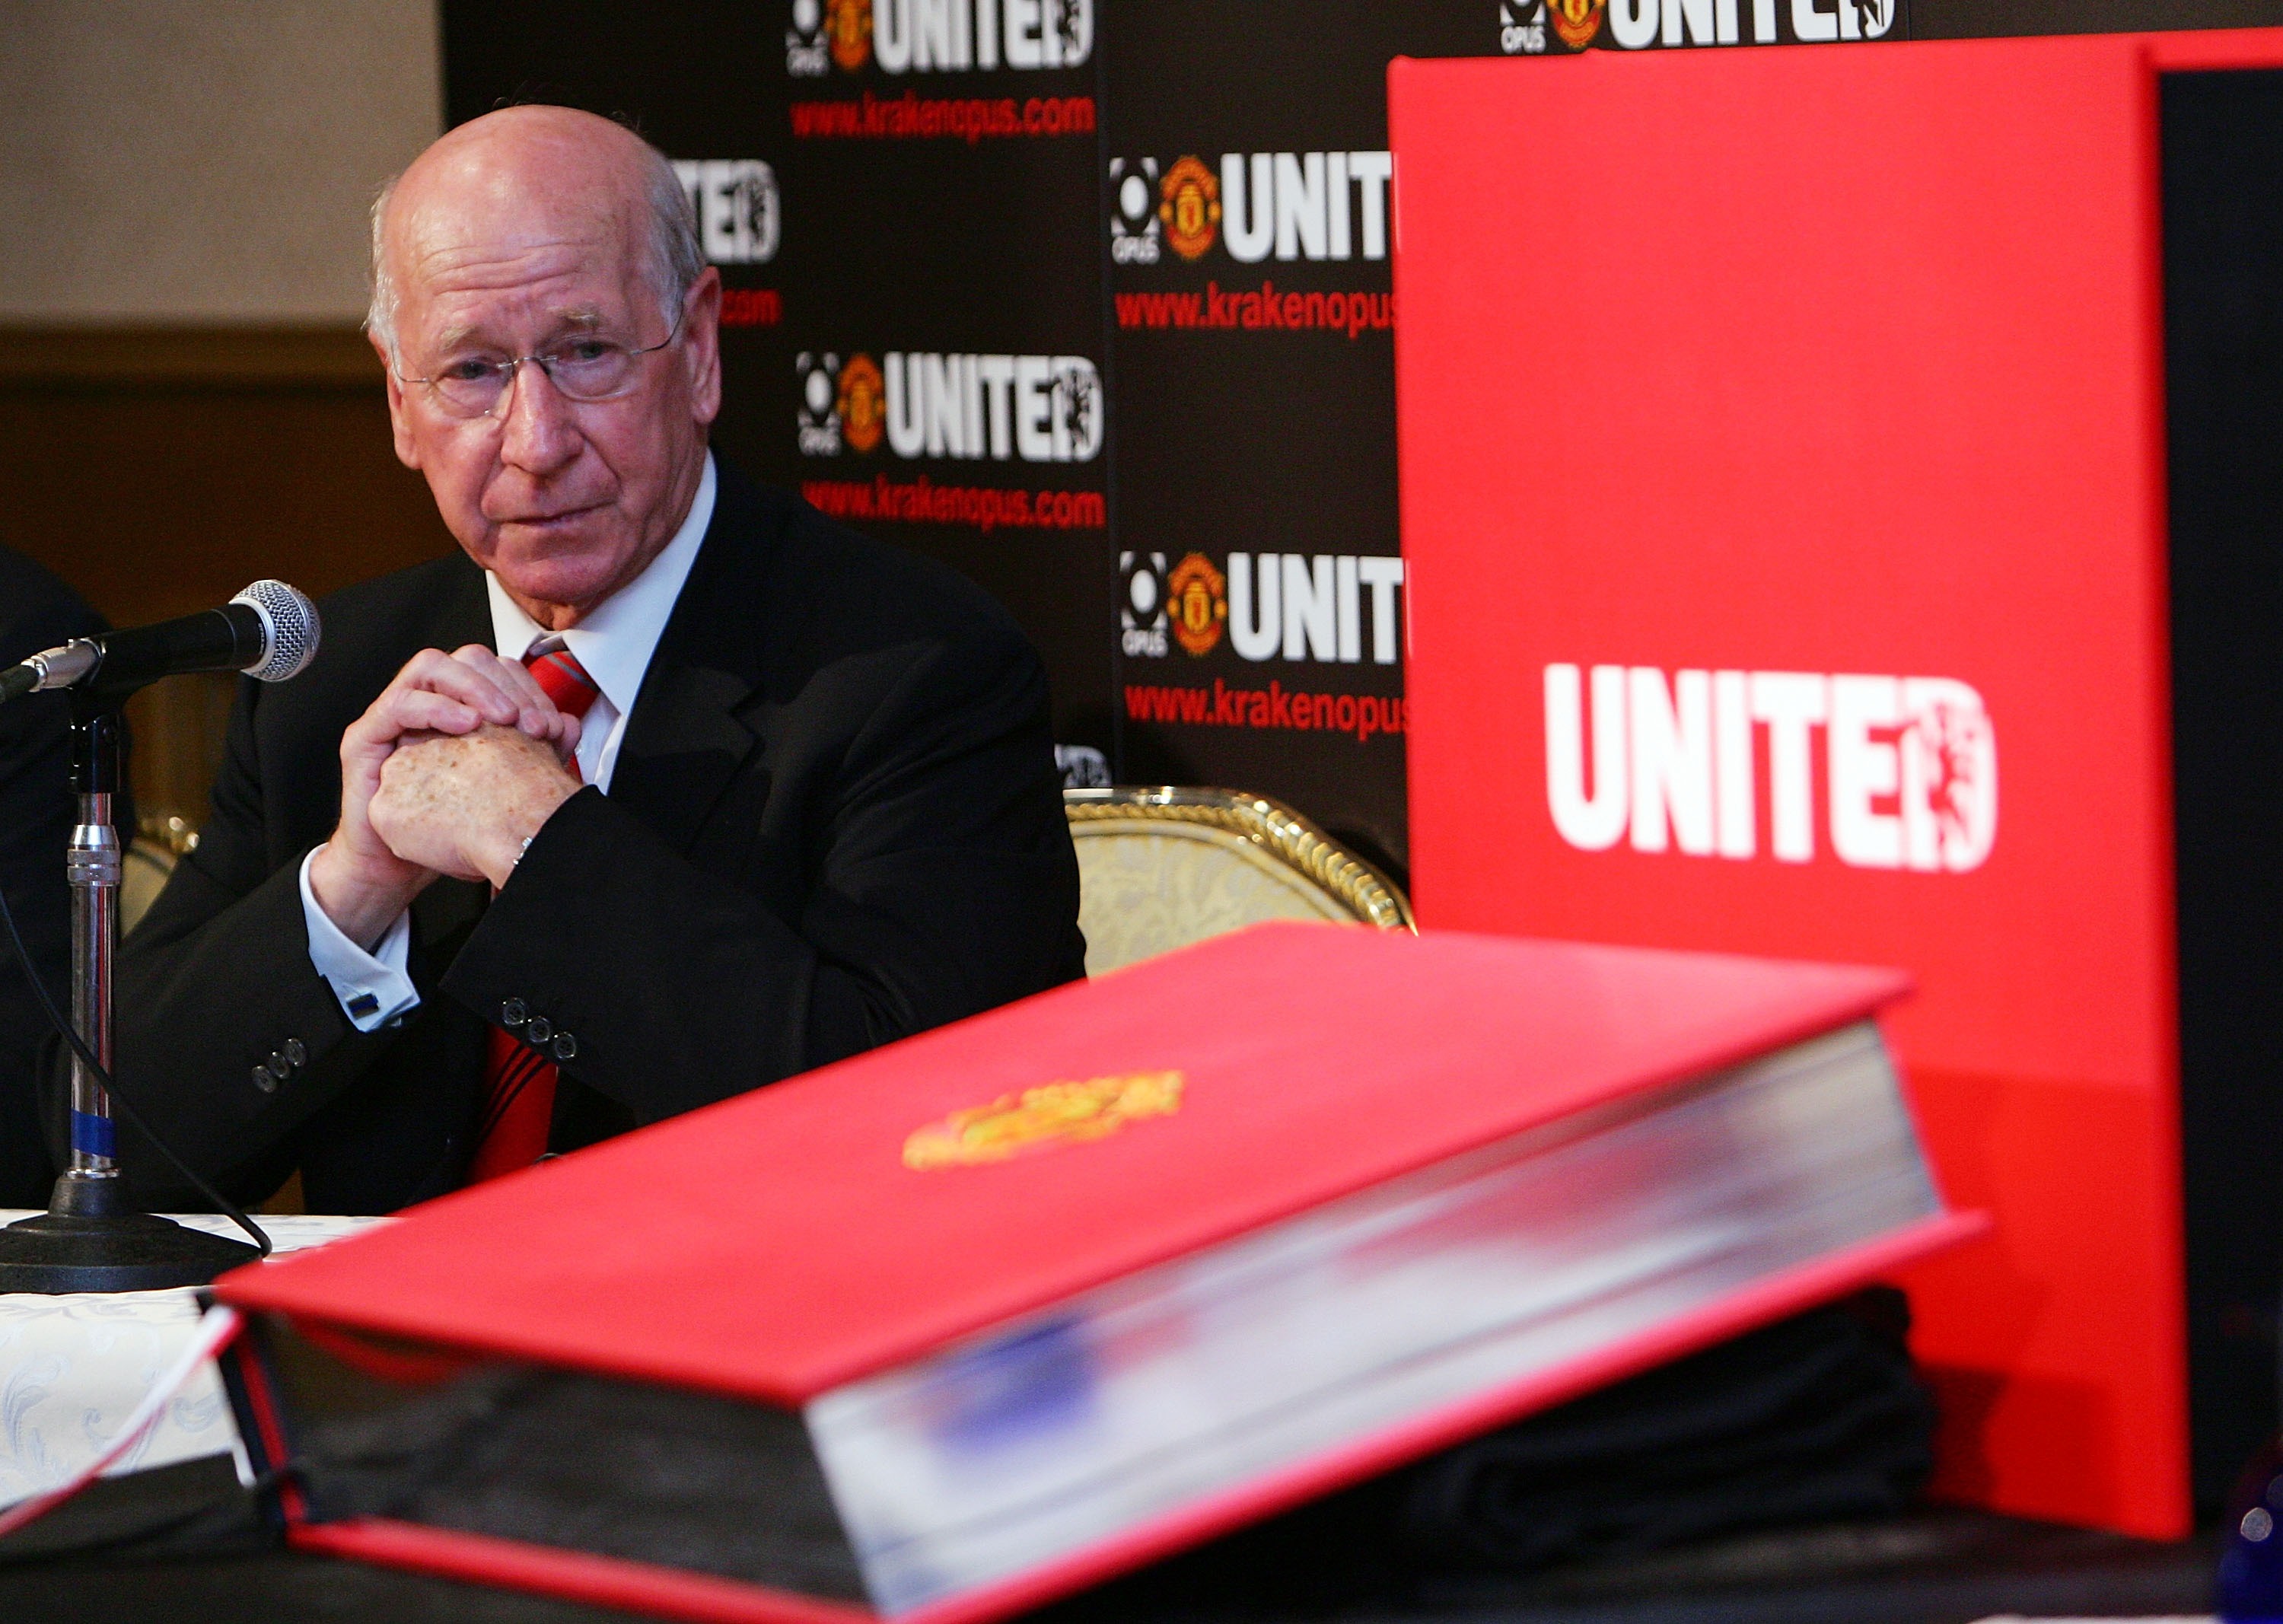 Sir Bobby Charlton - An England and Manchester United legend